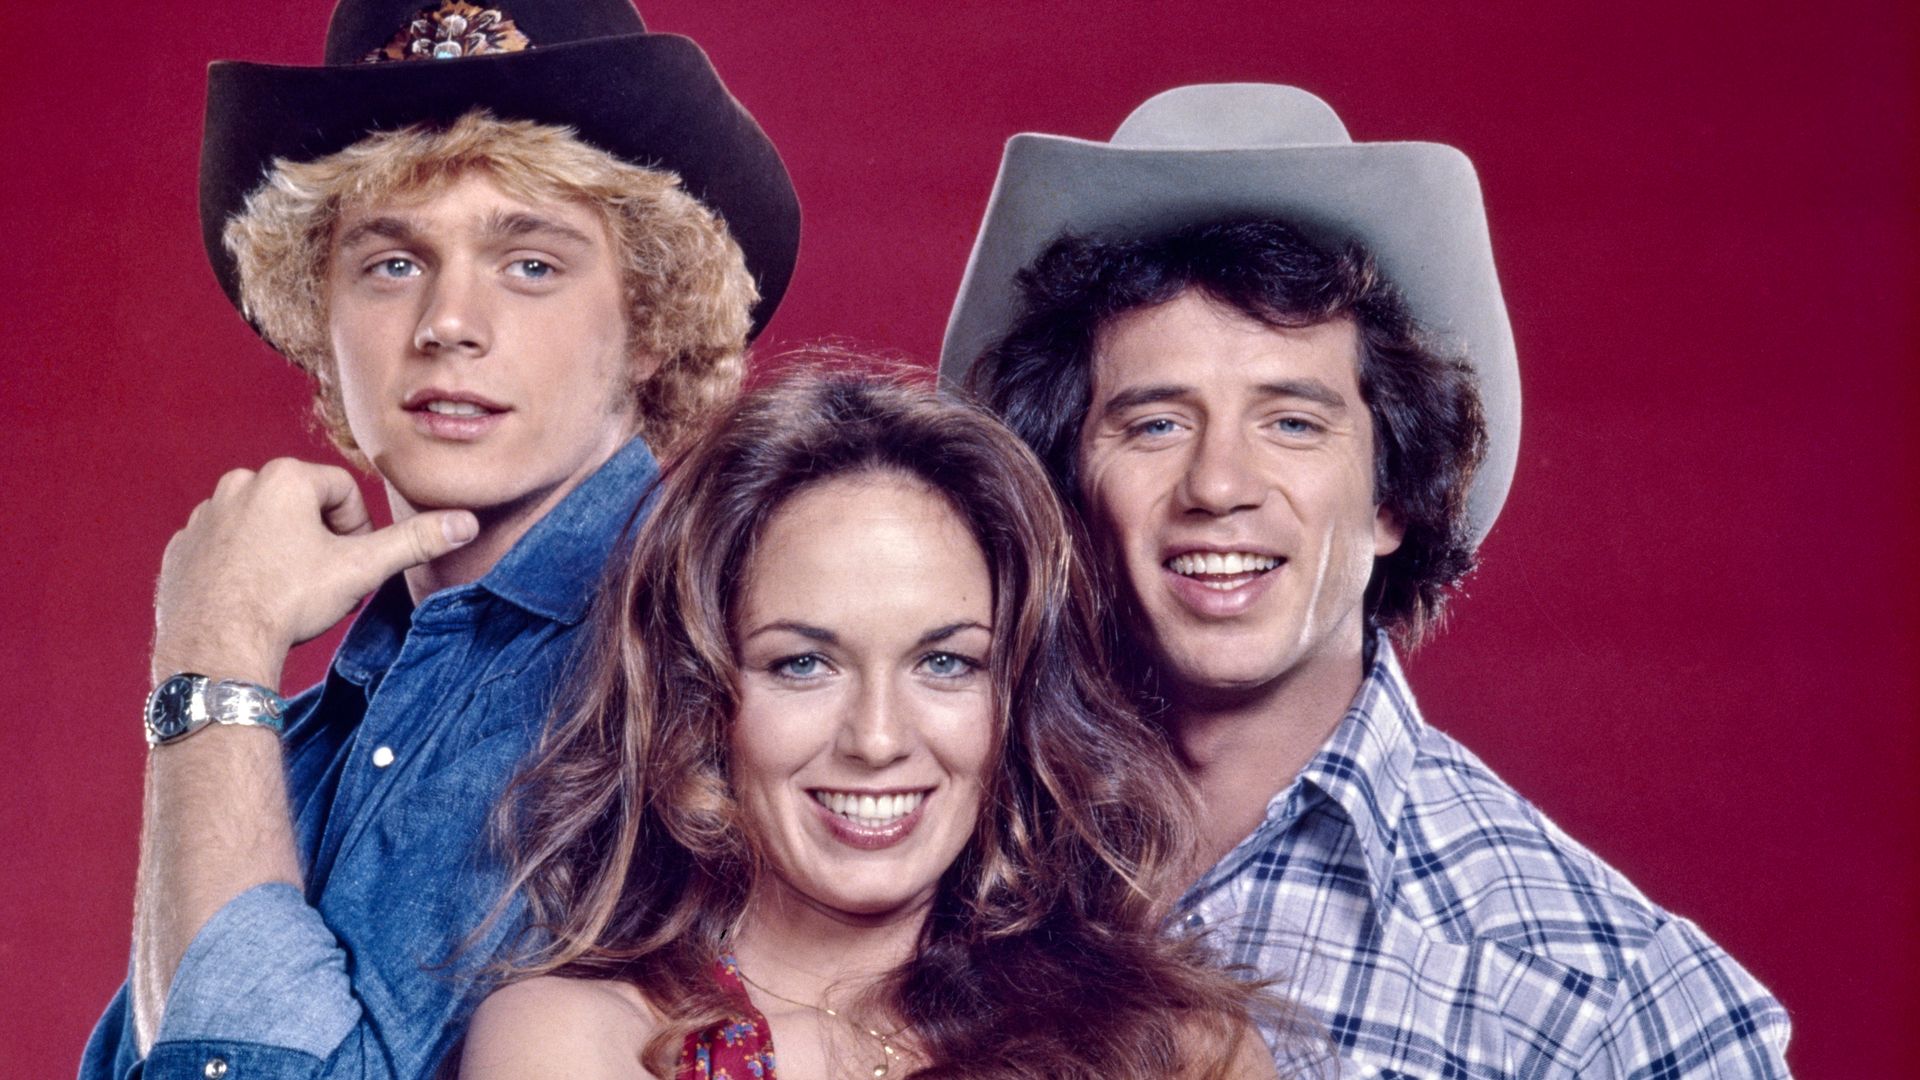 Catherine Bach, with John Schneider and Tom Wopat of The Dukes of Hazzard